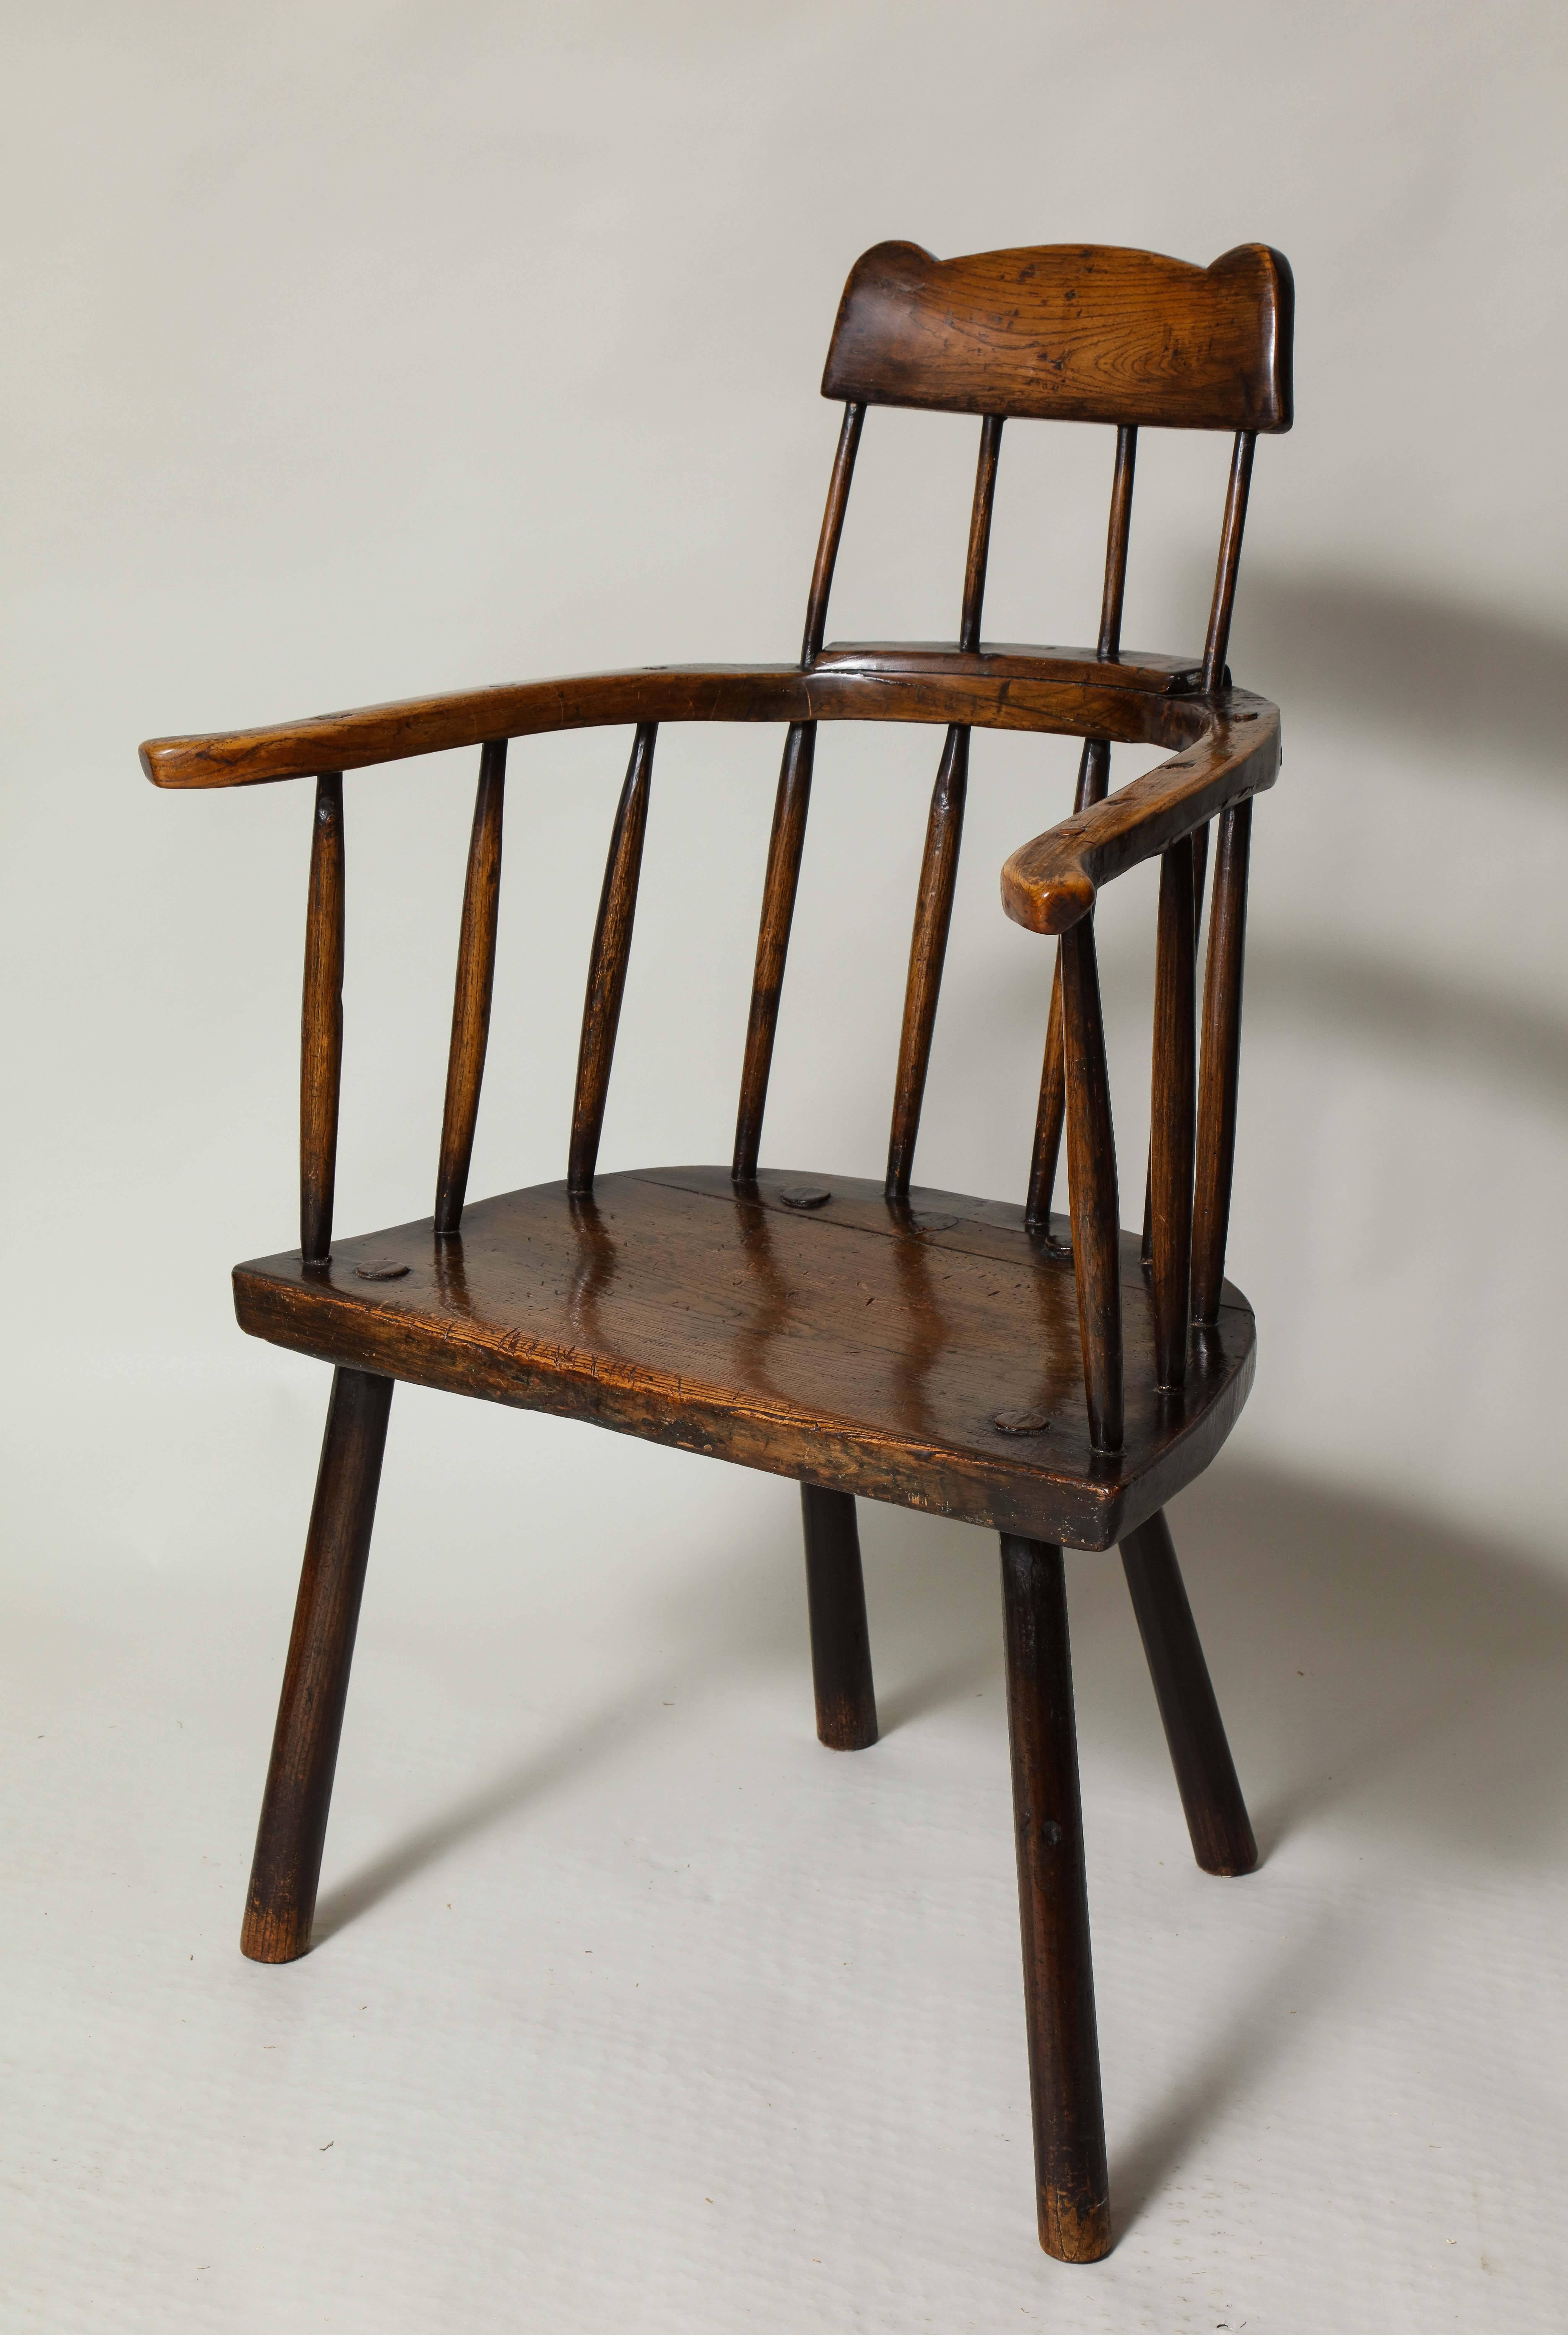 A unique primitive windsor chair with curved and eared comb-back crest rail over outs wept arm bow with slab elm seat standing on stick legs. Rich patination. A sculptural and whimsical folk piece. Welsh, 18th century.